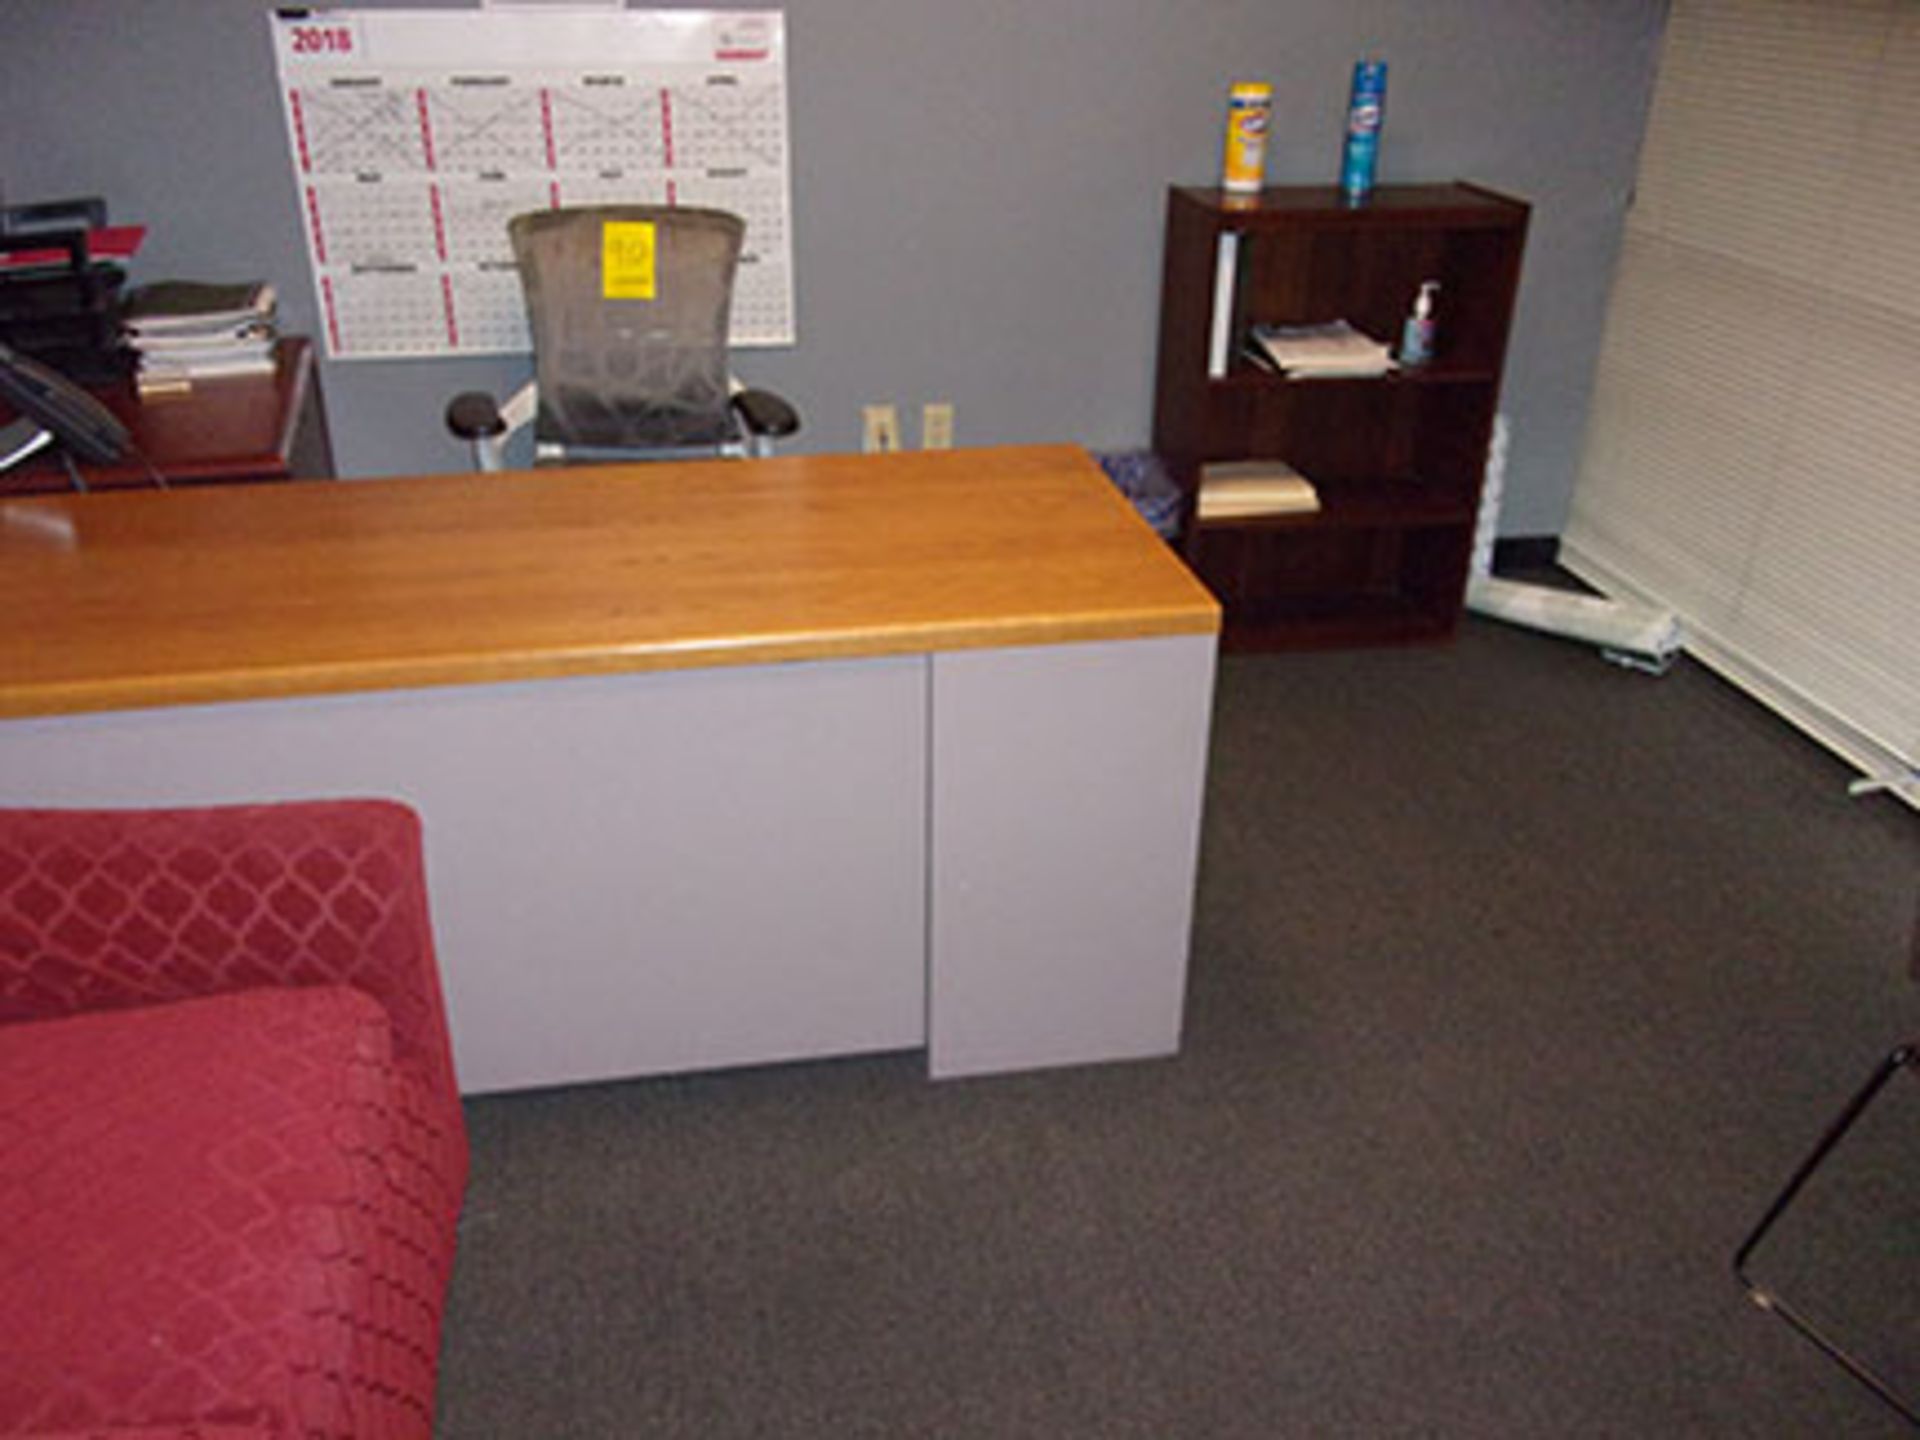 DESK WITH CHAIR, FILING CABINET, WOOD SHELF, TABLE WITH (2) CHAIRS (NO IT EQUIPMENT) - Image 2 of 3